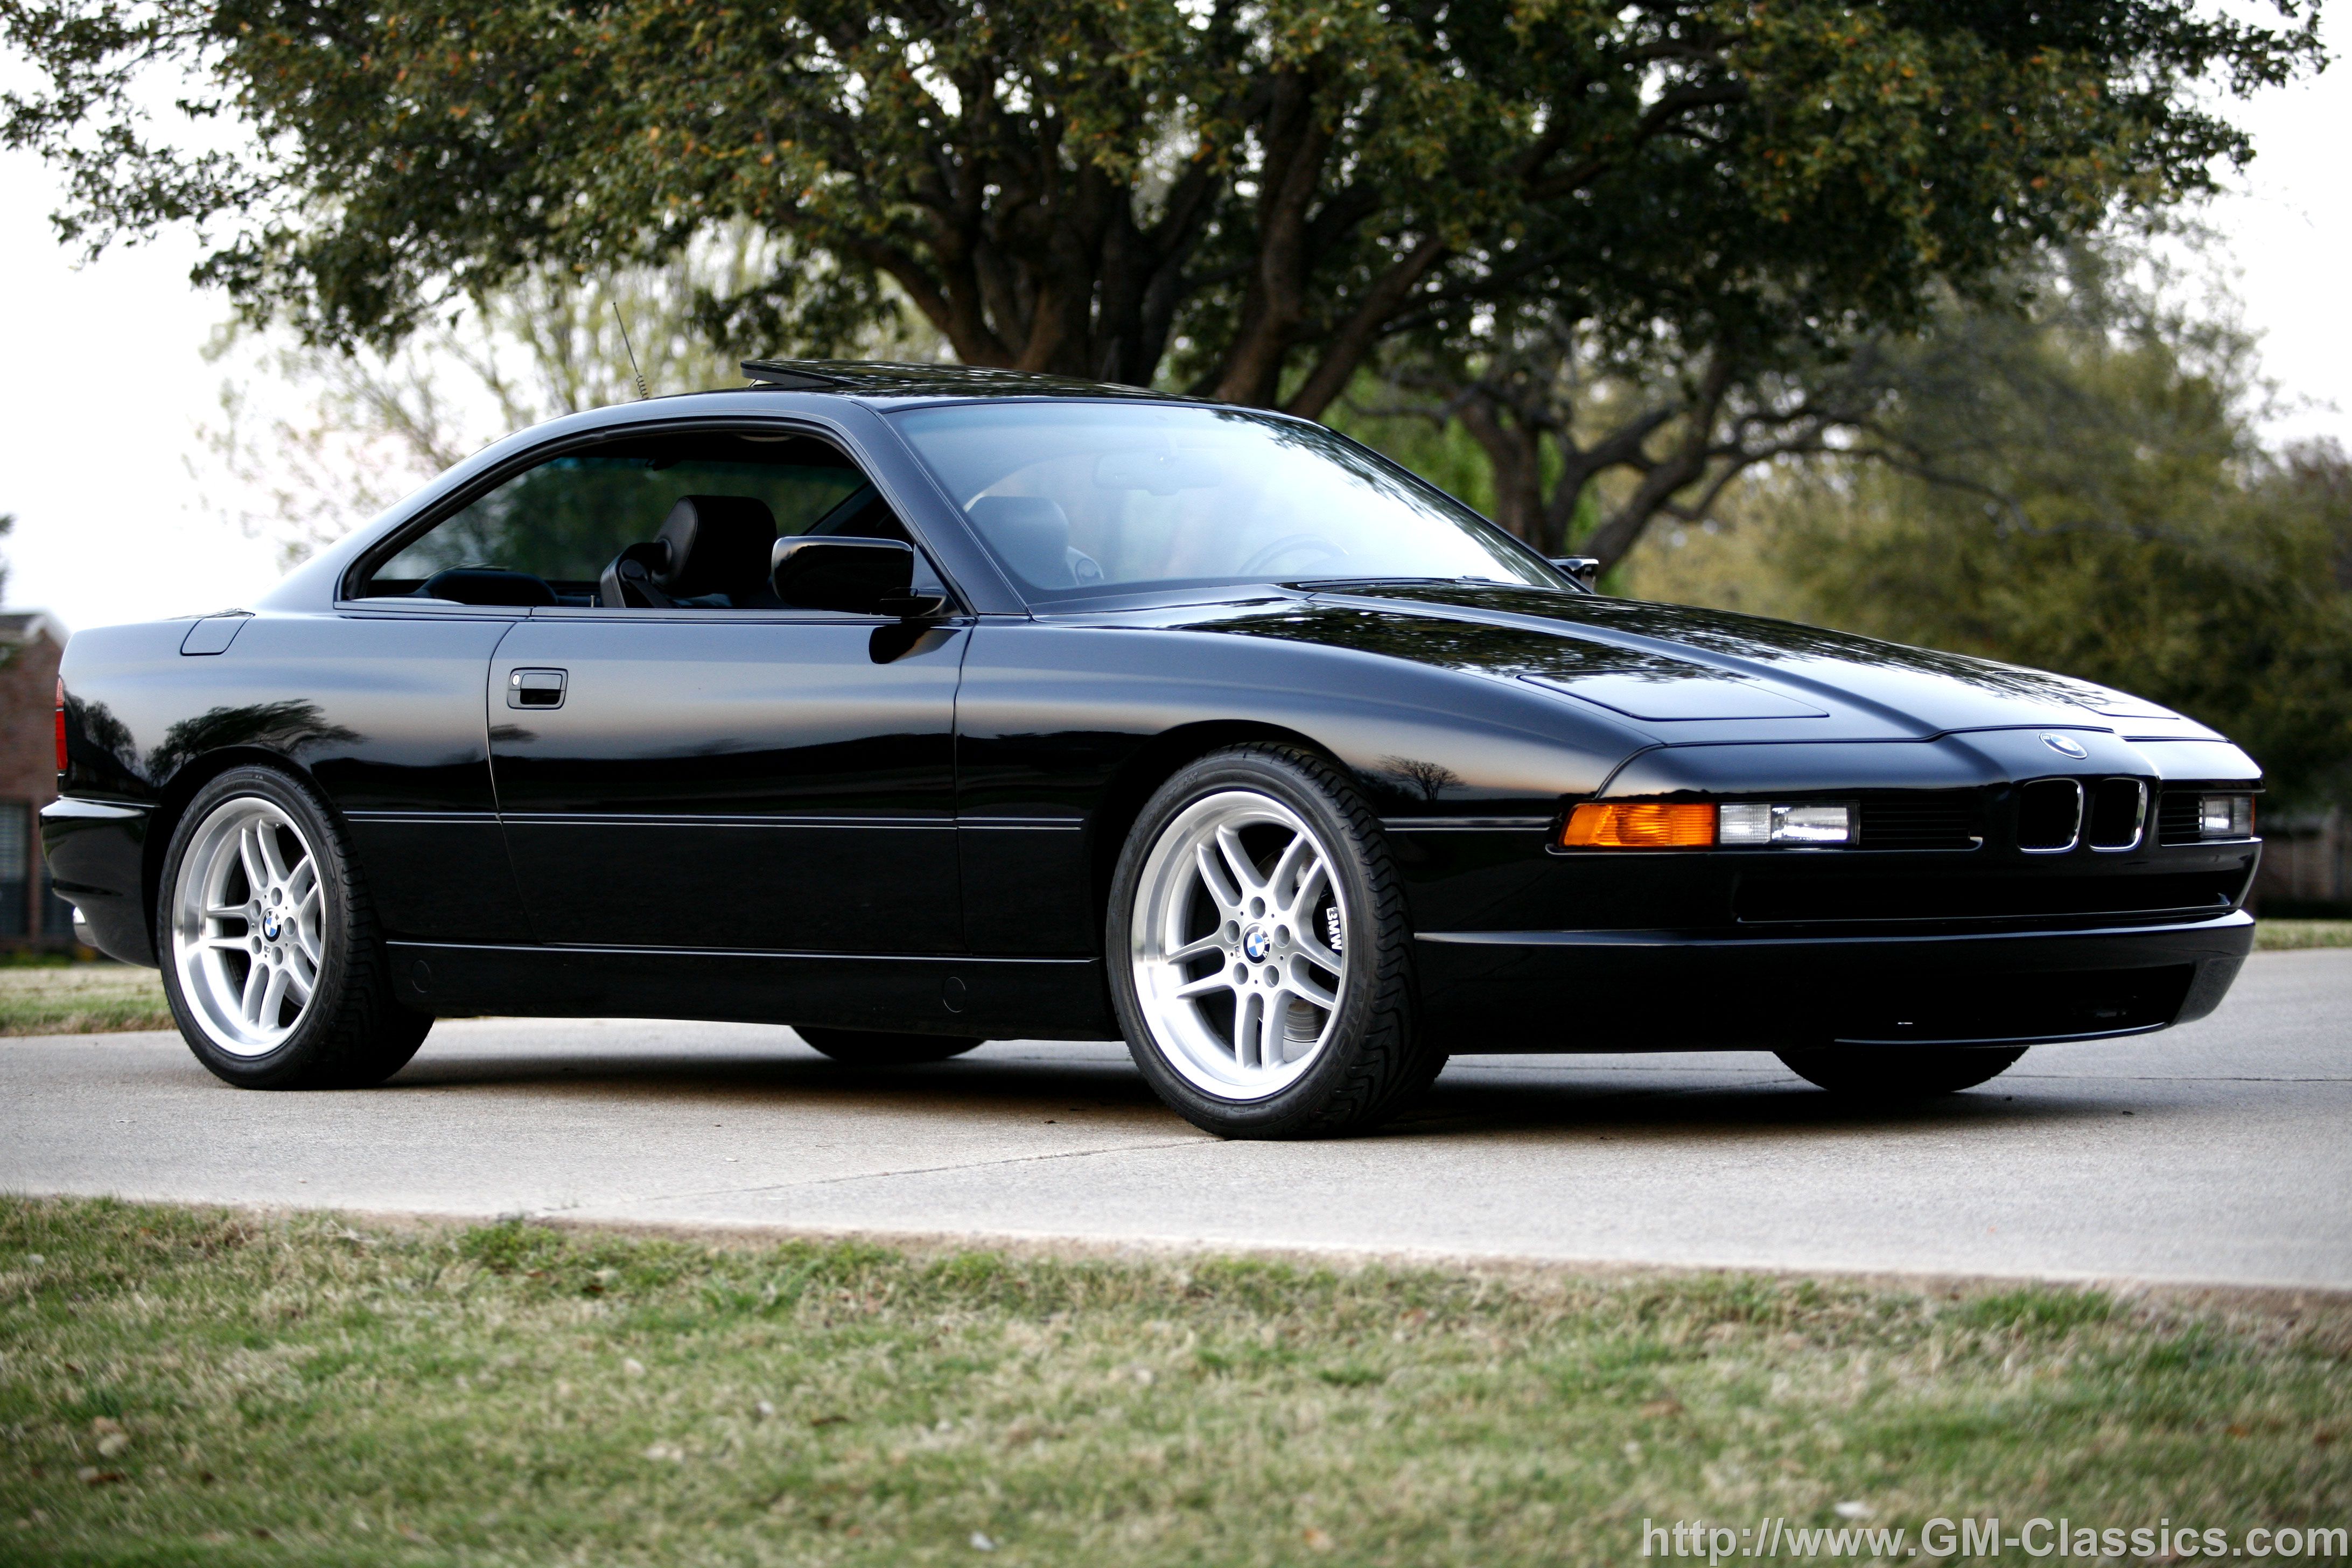 The 1991 BMW 8-Series is designed and produced by BMW.